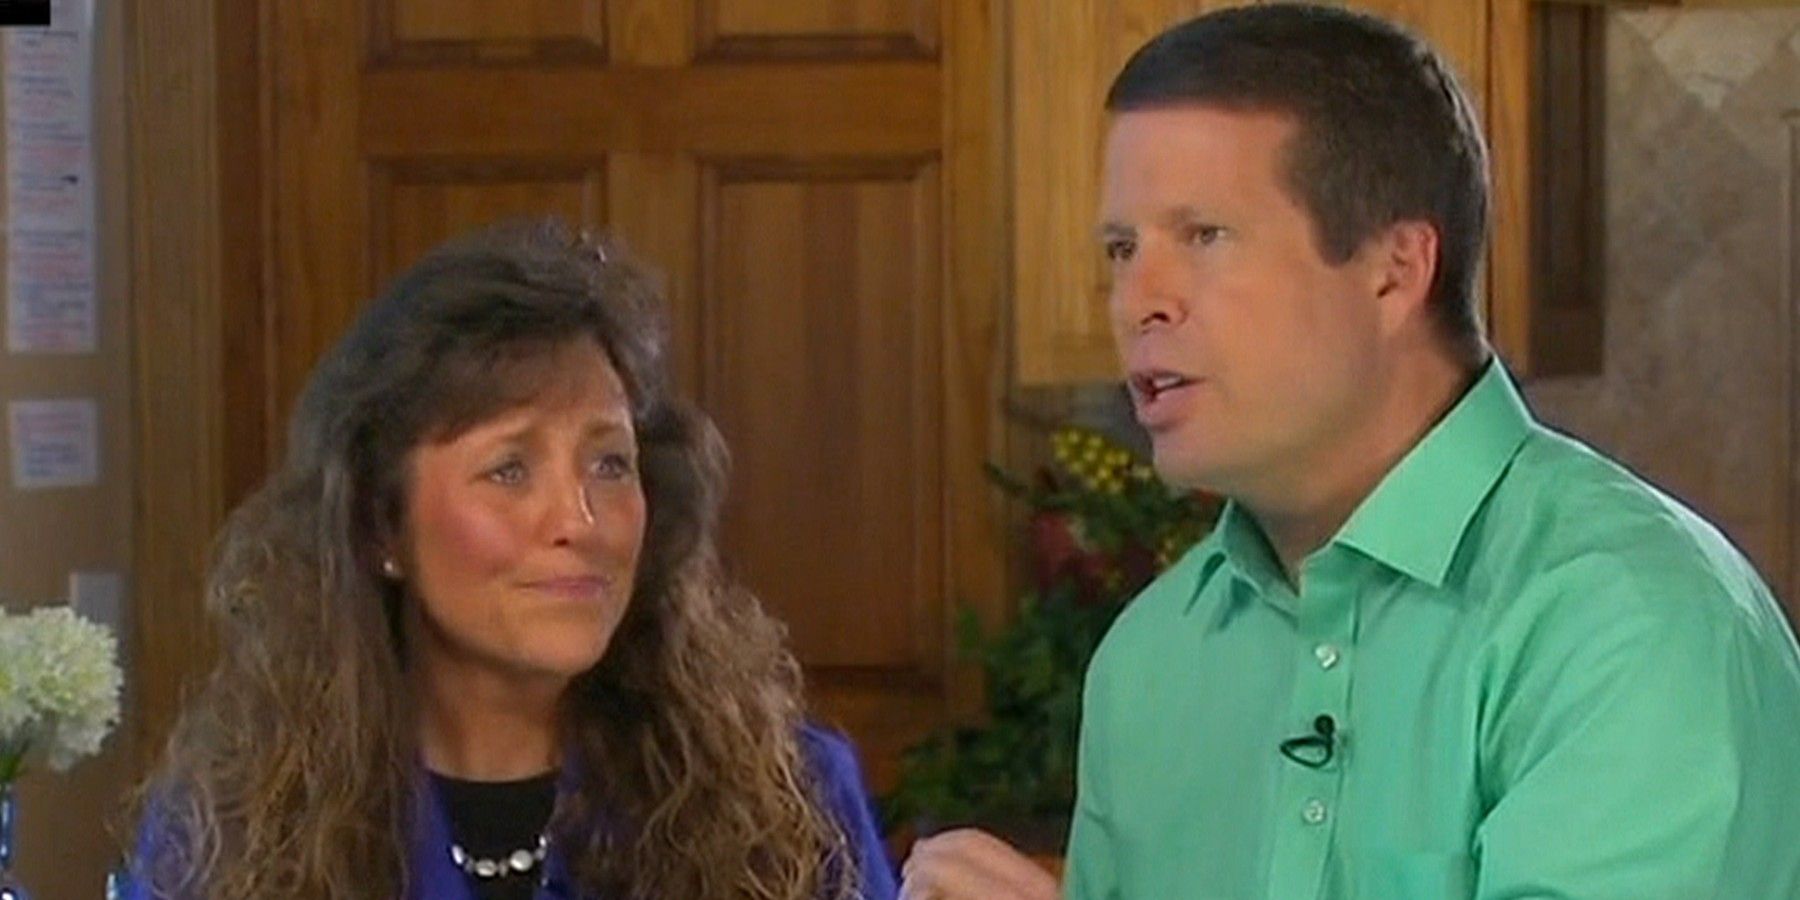 jim bob michelle duggar Counting On cropped